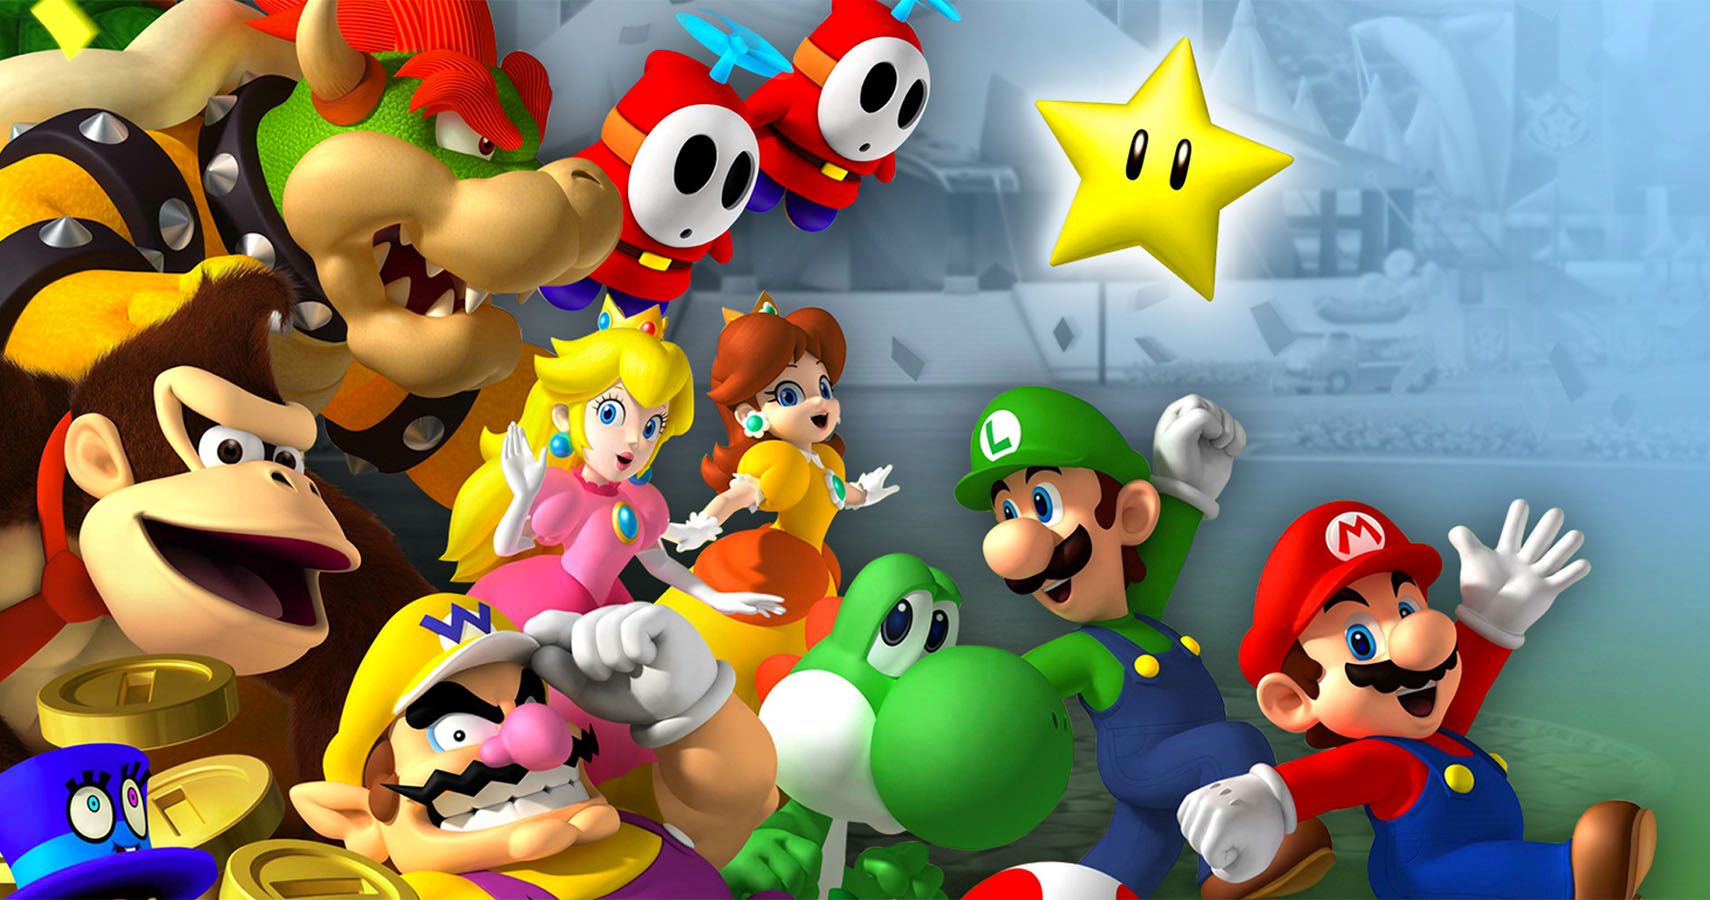 20 Best Multiplayer GameCube Games Of All Time